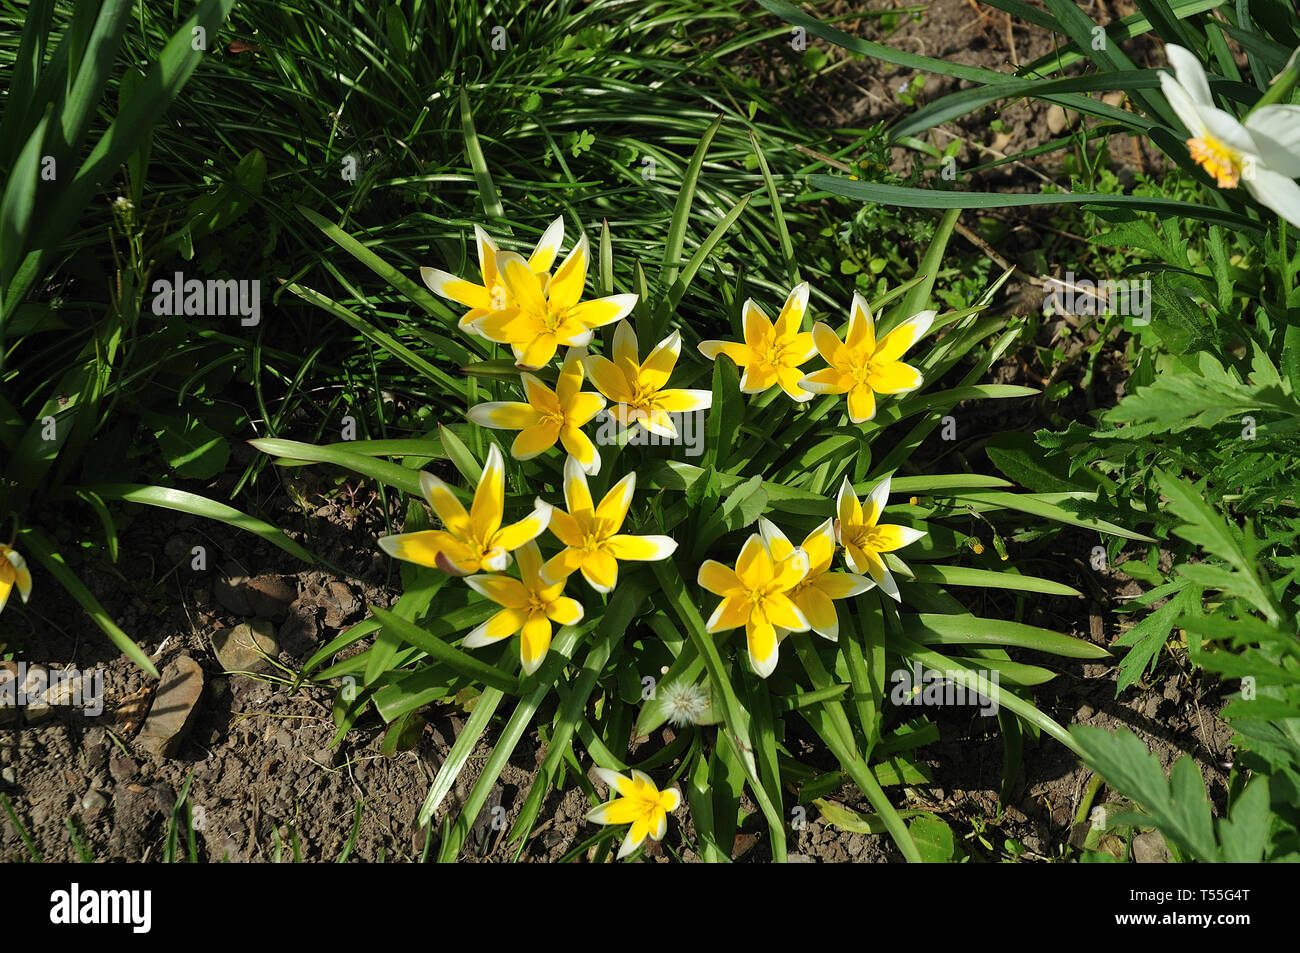 late tulips with star shaped yellow and white flowers in a garden Stock Photo